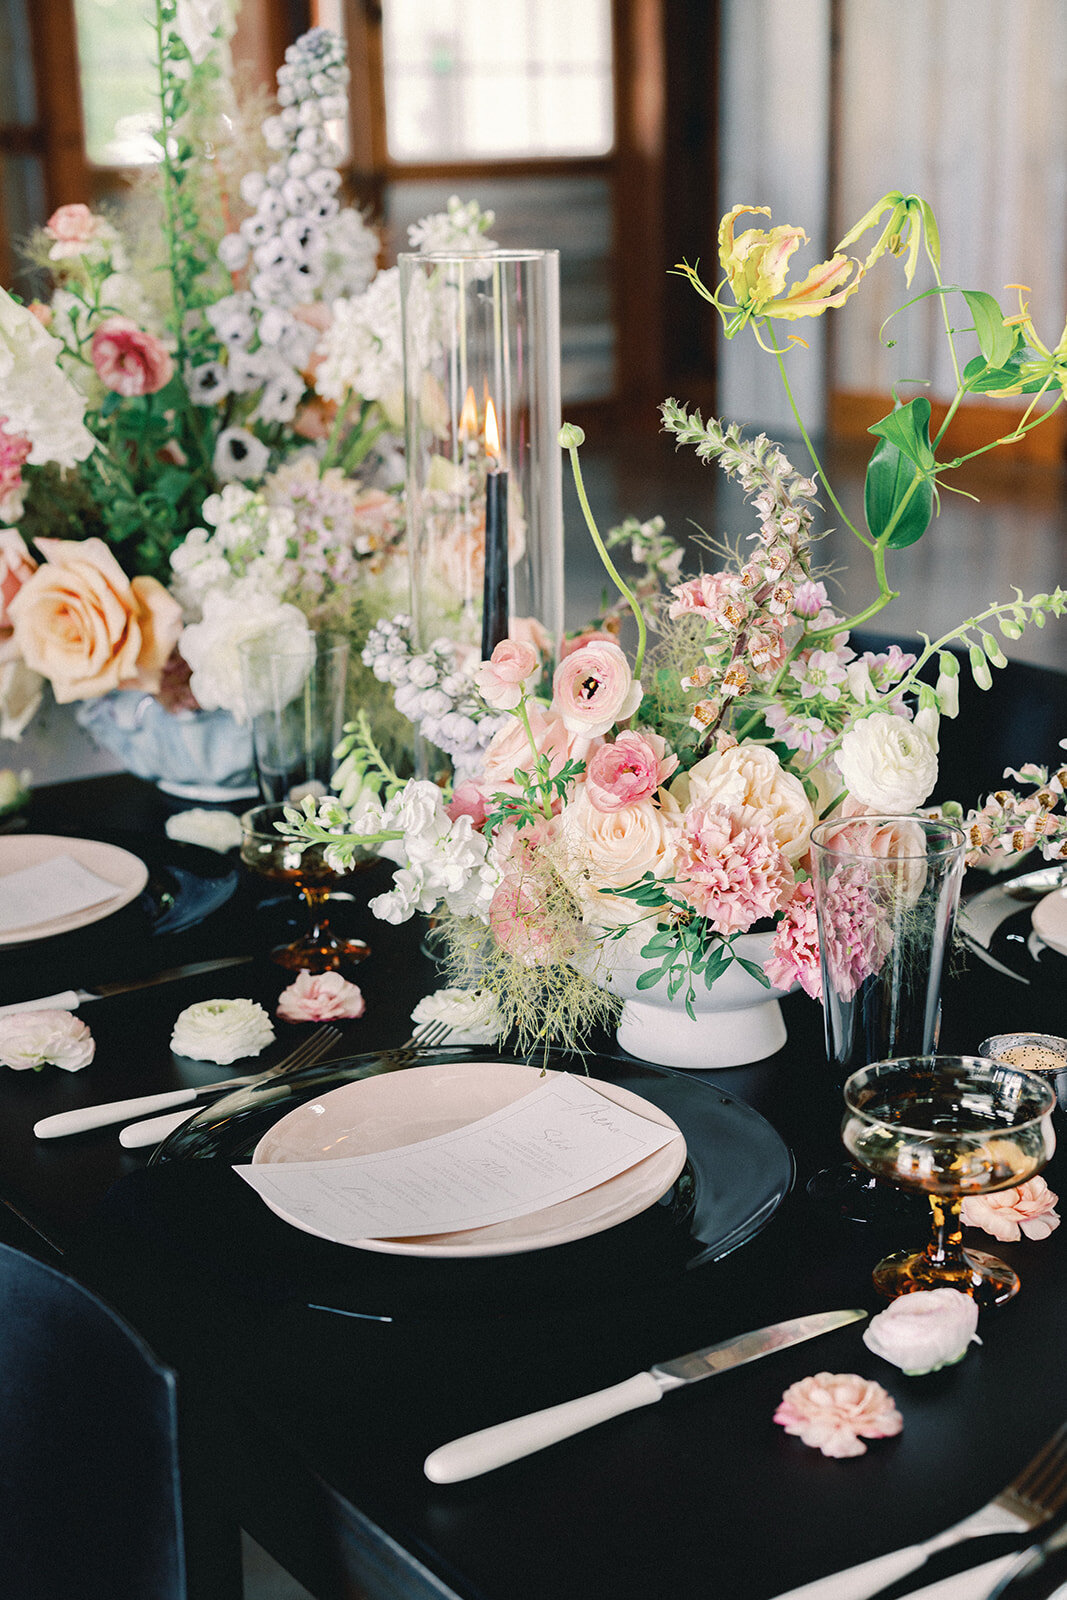 Table setting with menus and pink and green floral centerpieces